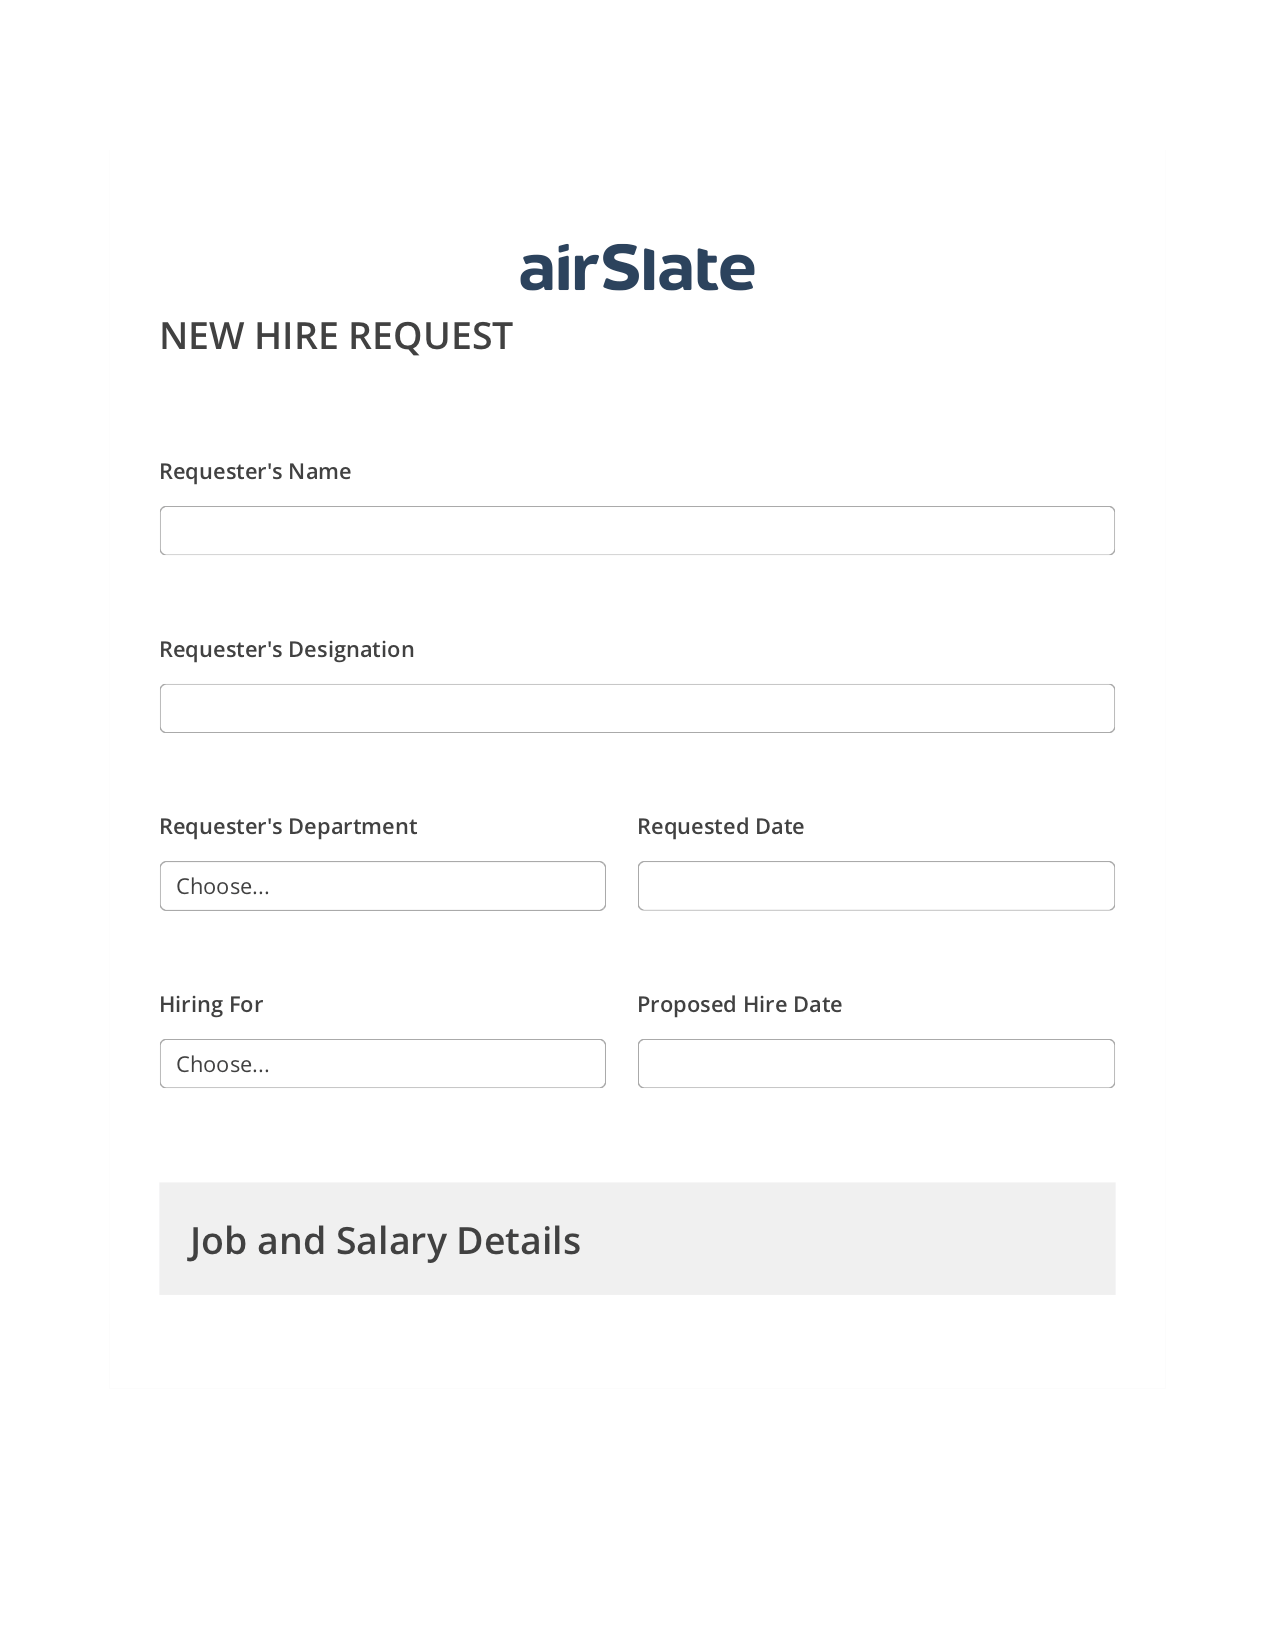 Hiring Request Workflow Pre-fill Dropdowns from Airtable, Open under a Role Bot, Export to Salesforce Record Bot